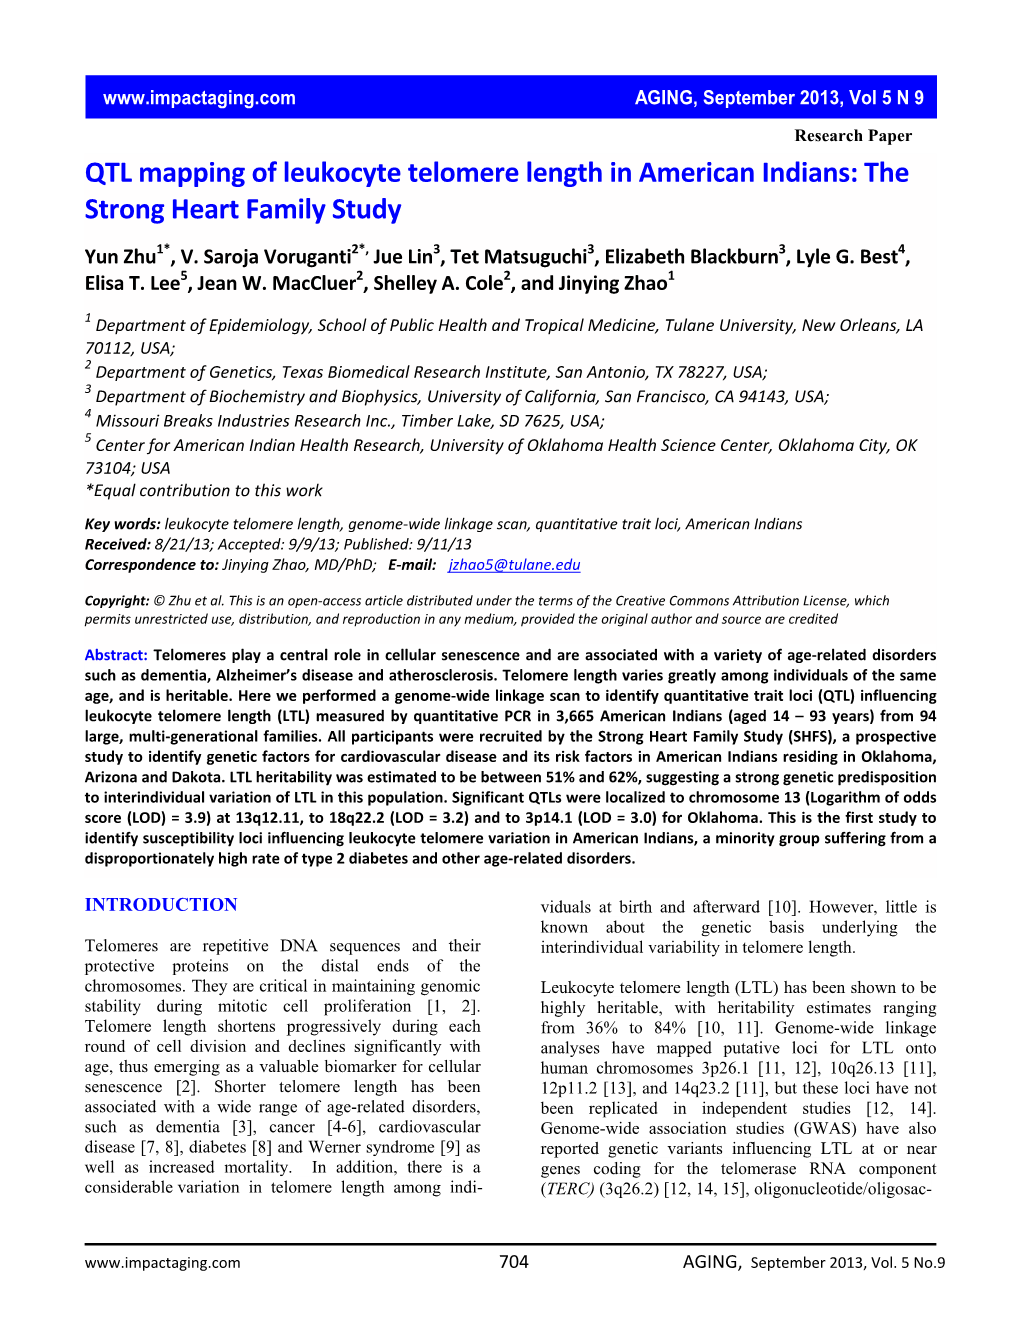 QTL Mapping of Leukocyte Telomere Length in American Indians: The